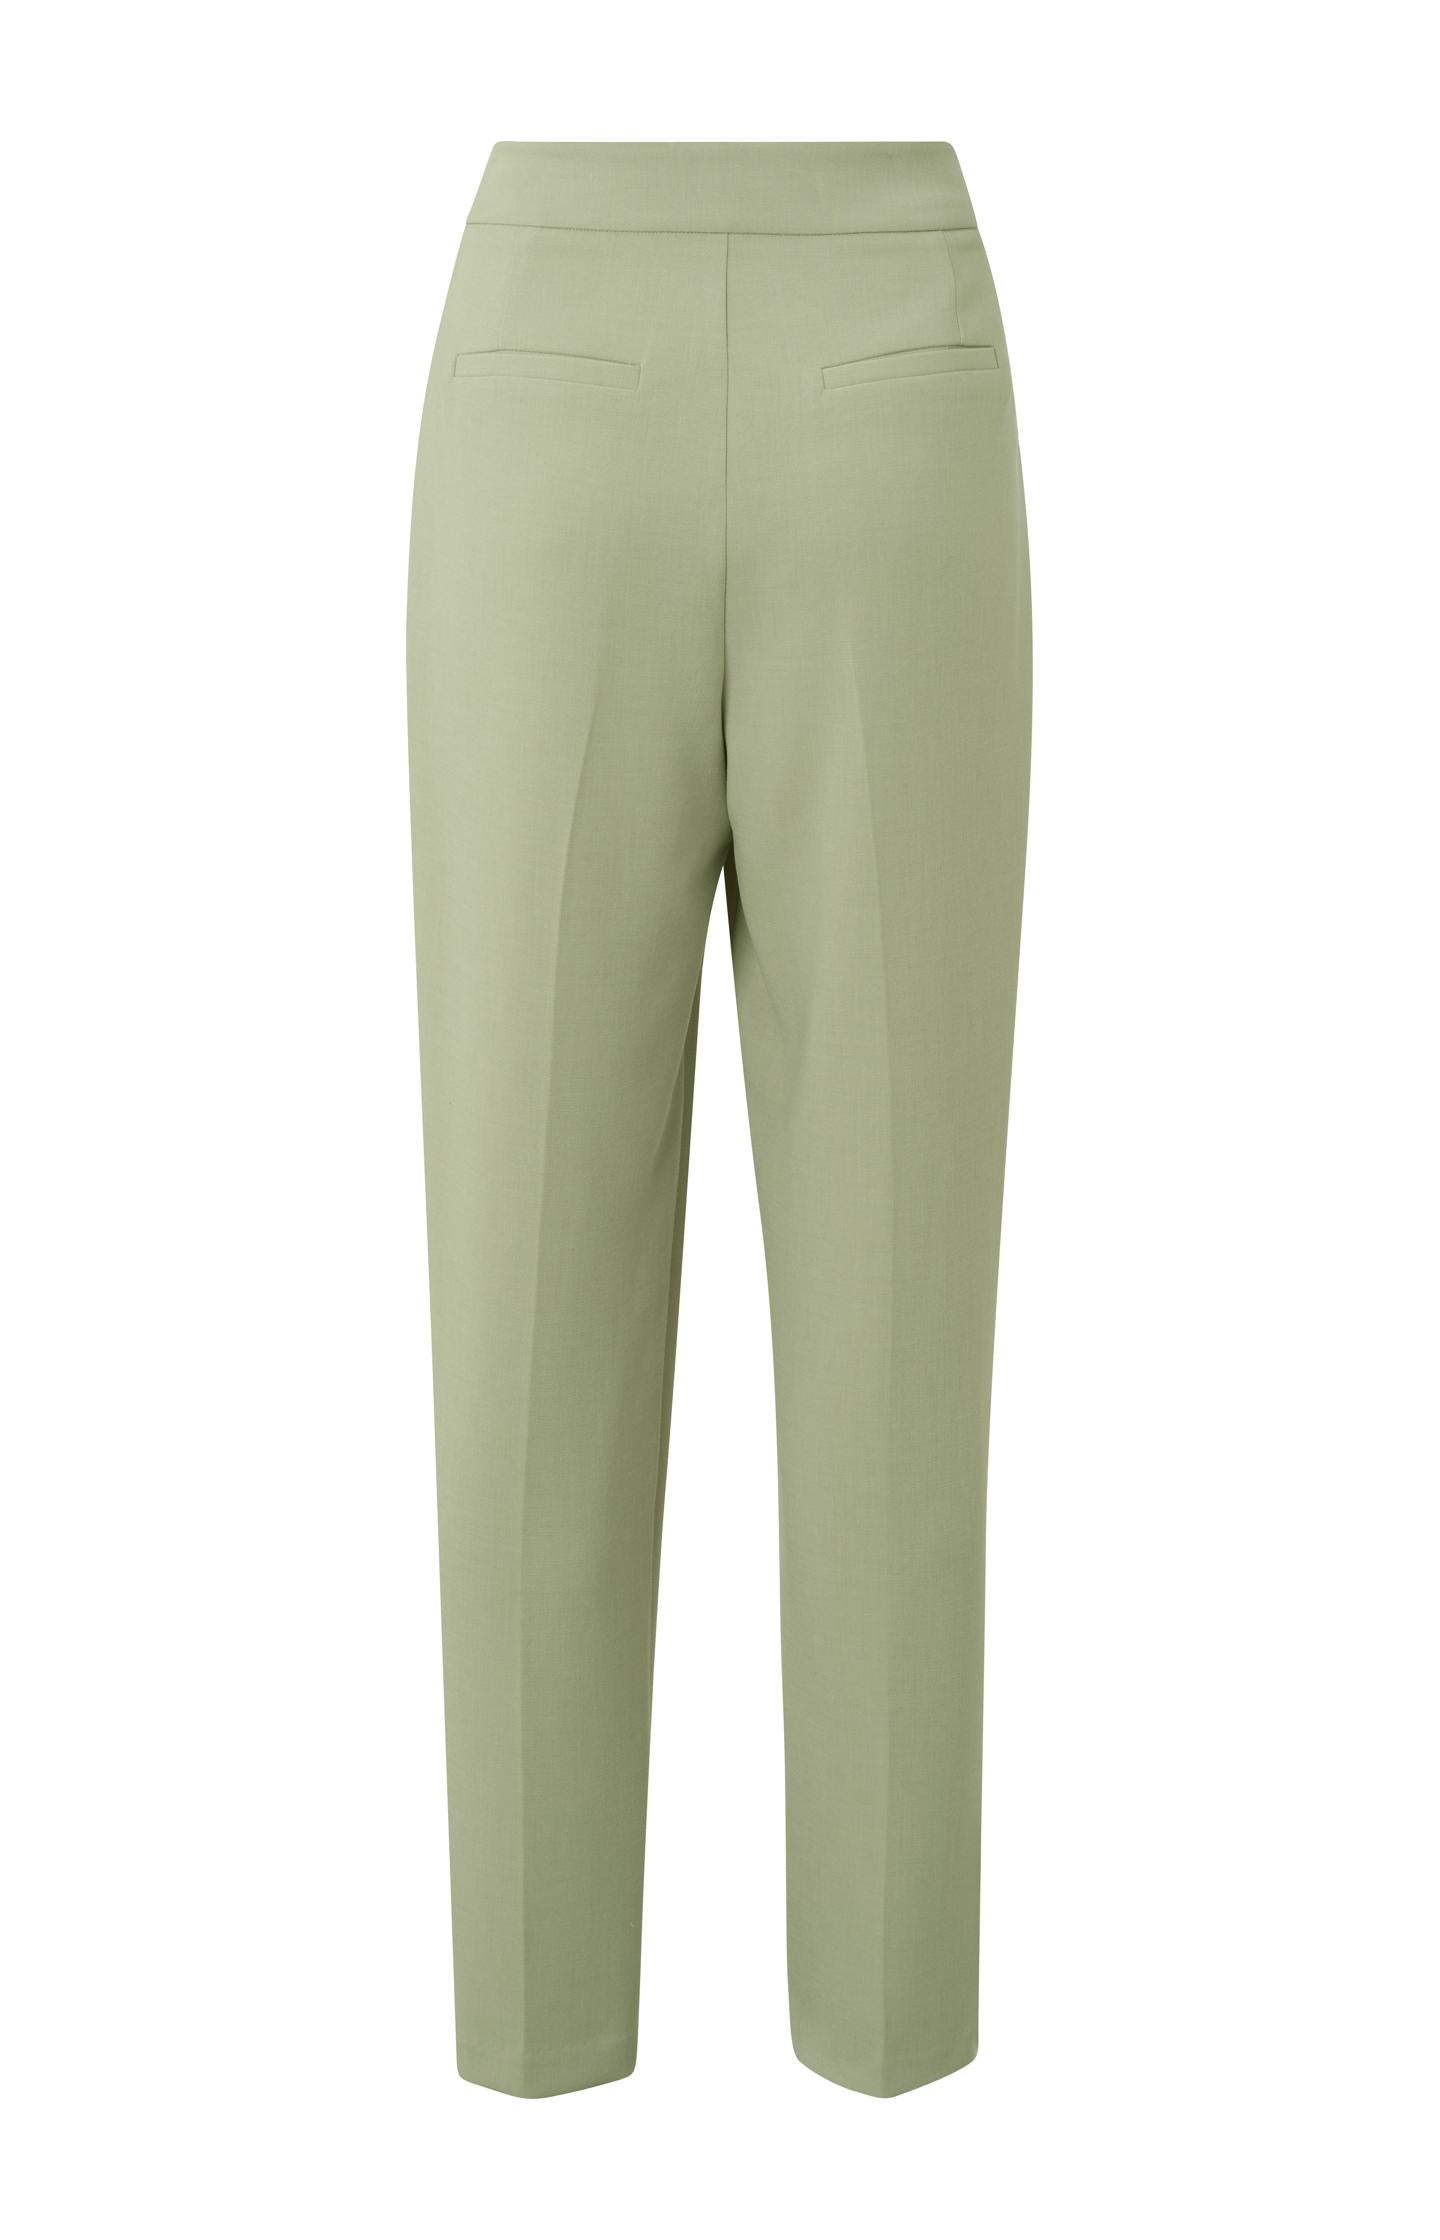 High waist trousers with pleated details and side pockets